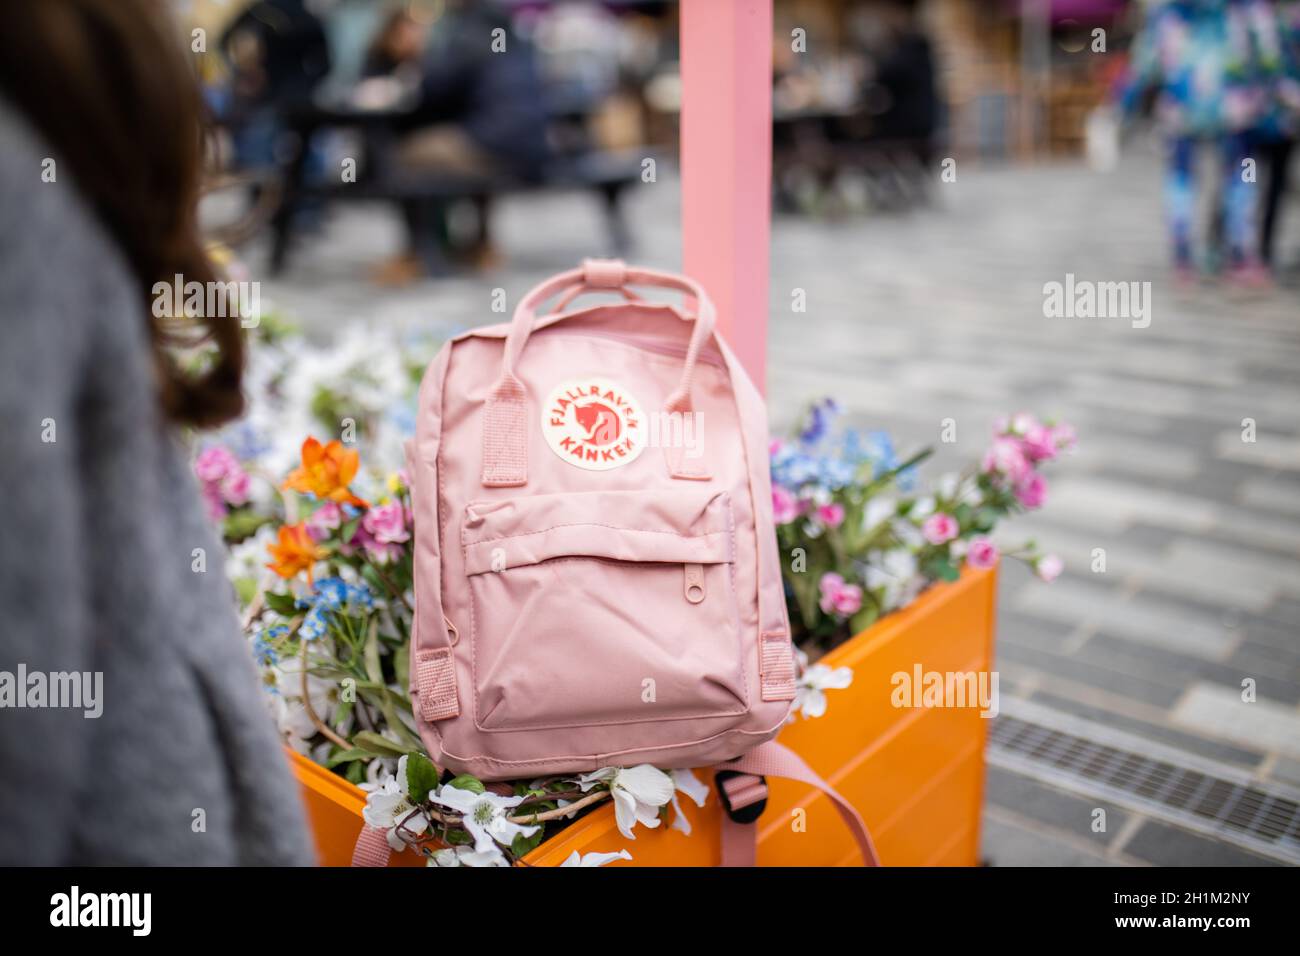 London, UK - November 4, 2020: Pink Fjallraven backpack above flowers and plants with blurry street as background. Pink rucksack on colorful flowers i Stock Photo